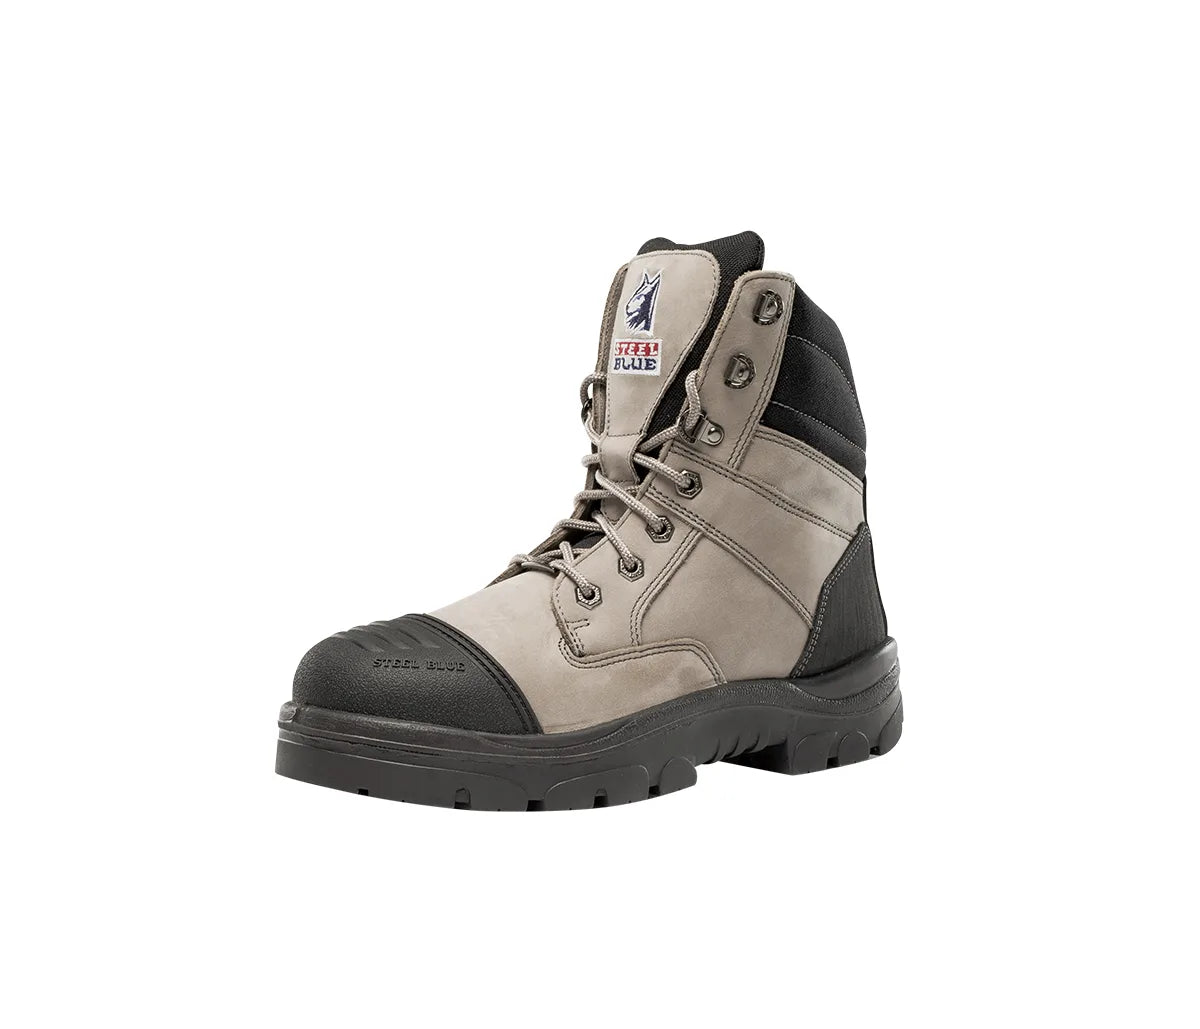 Southern Cross Zip S3 150mm Men's Ankle Safety Boot